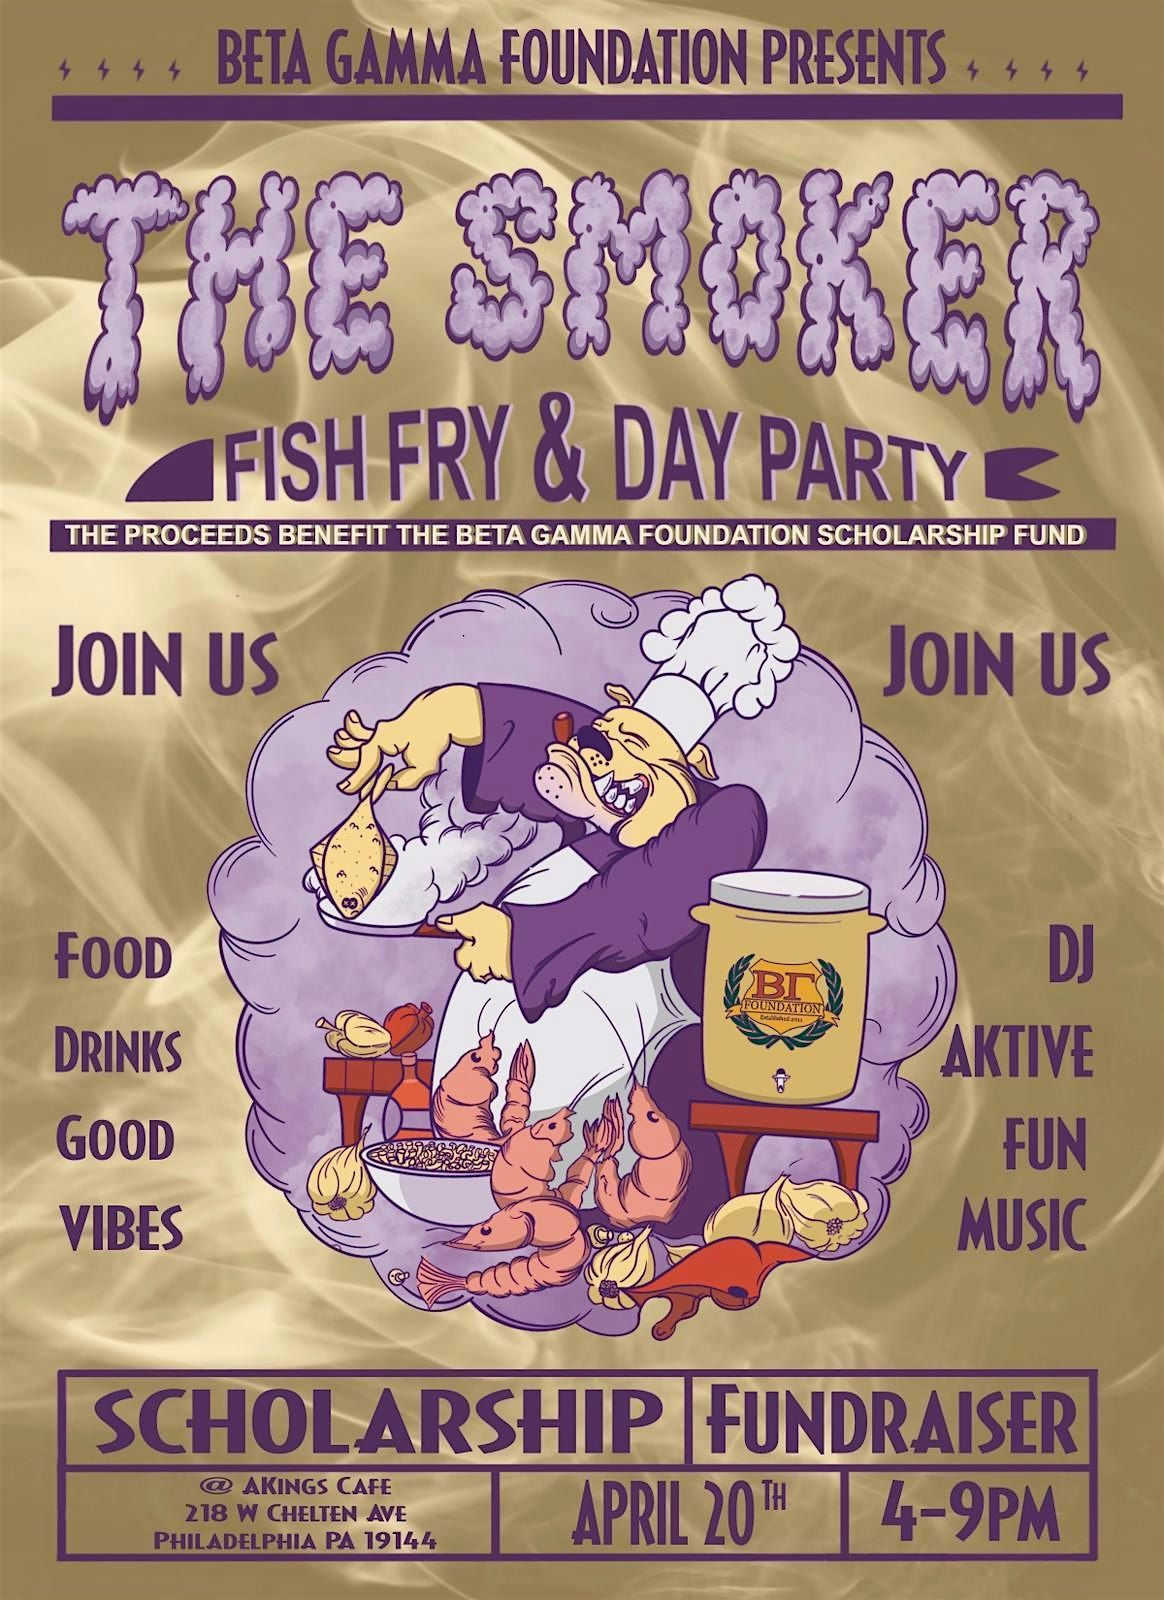 The Smoker Fish Fry\/Day Party Fundraiser